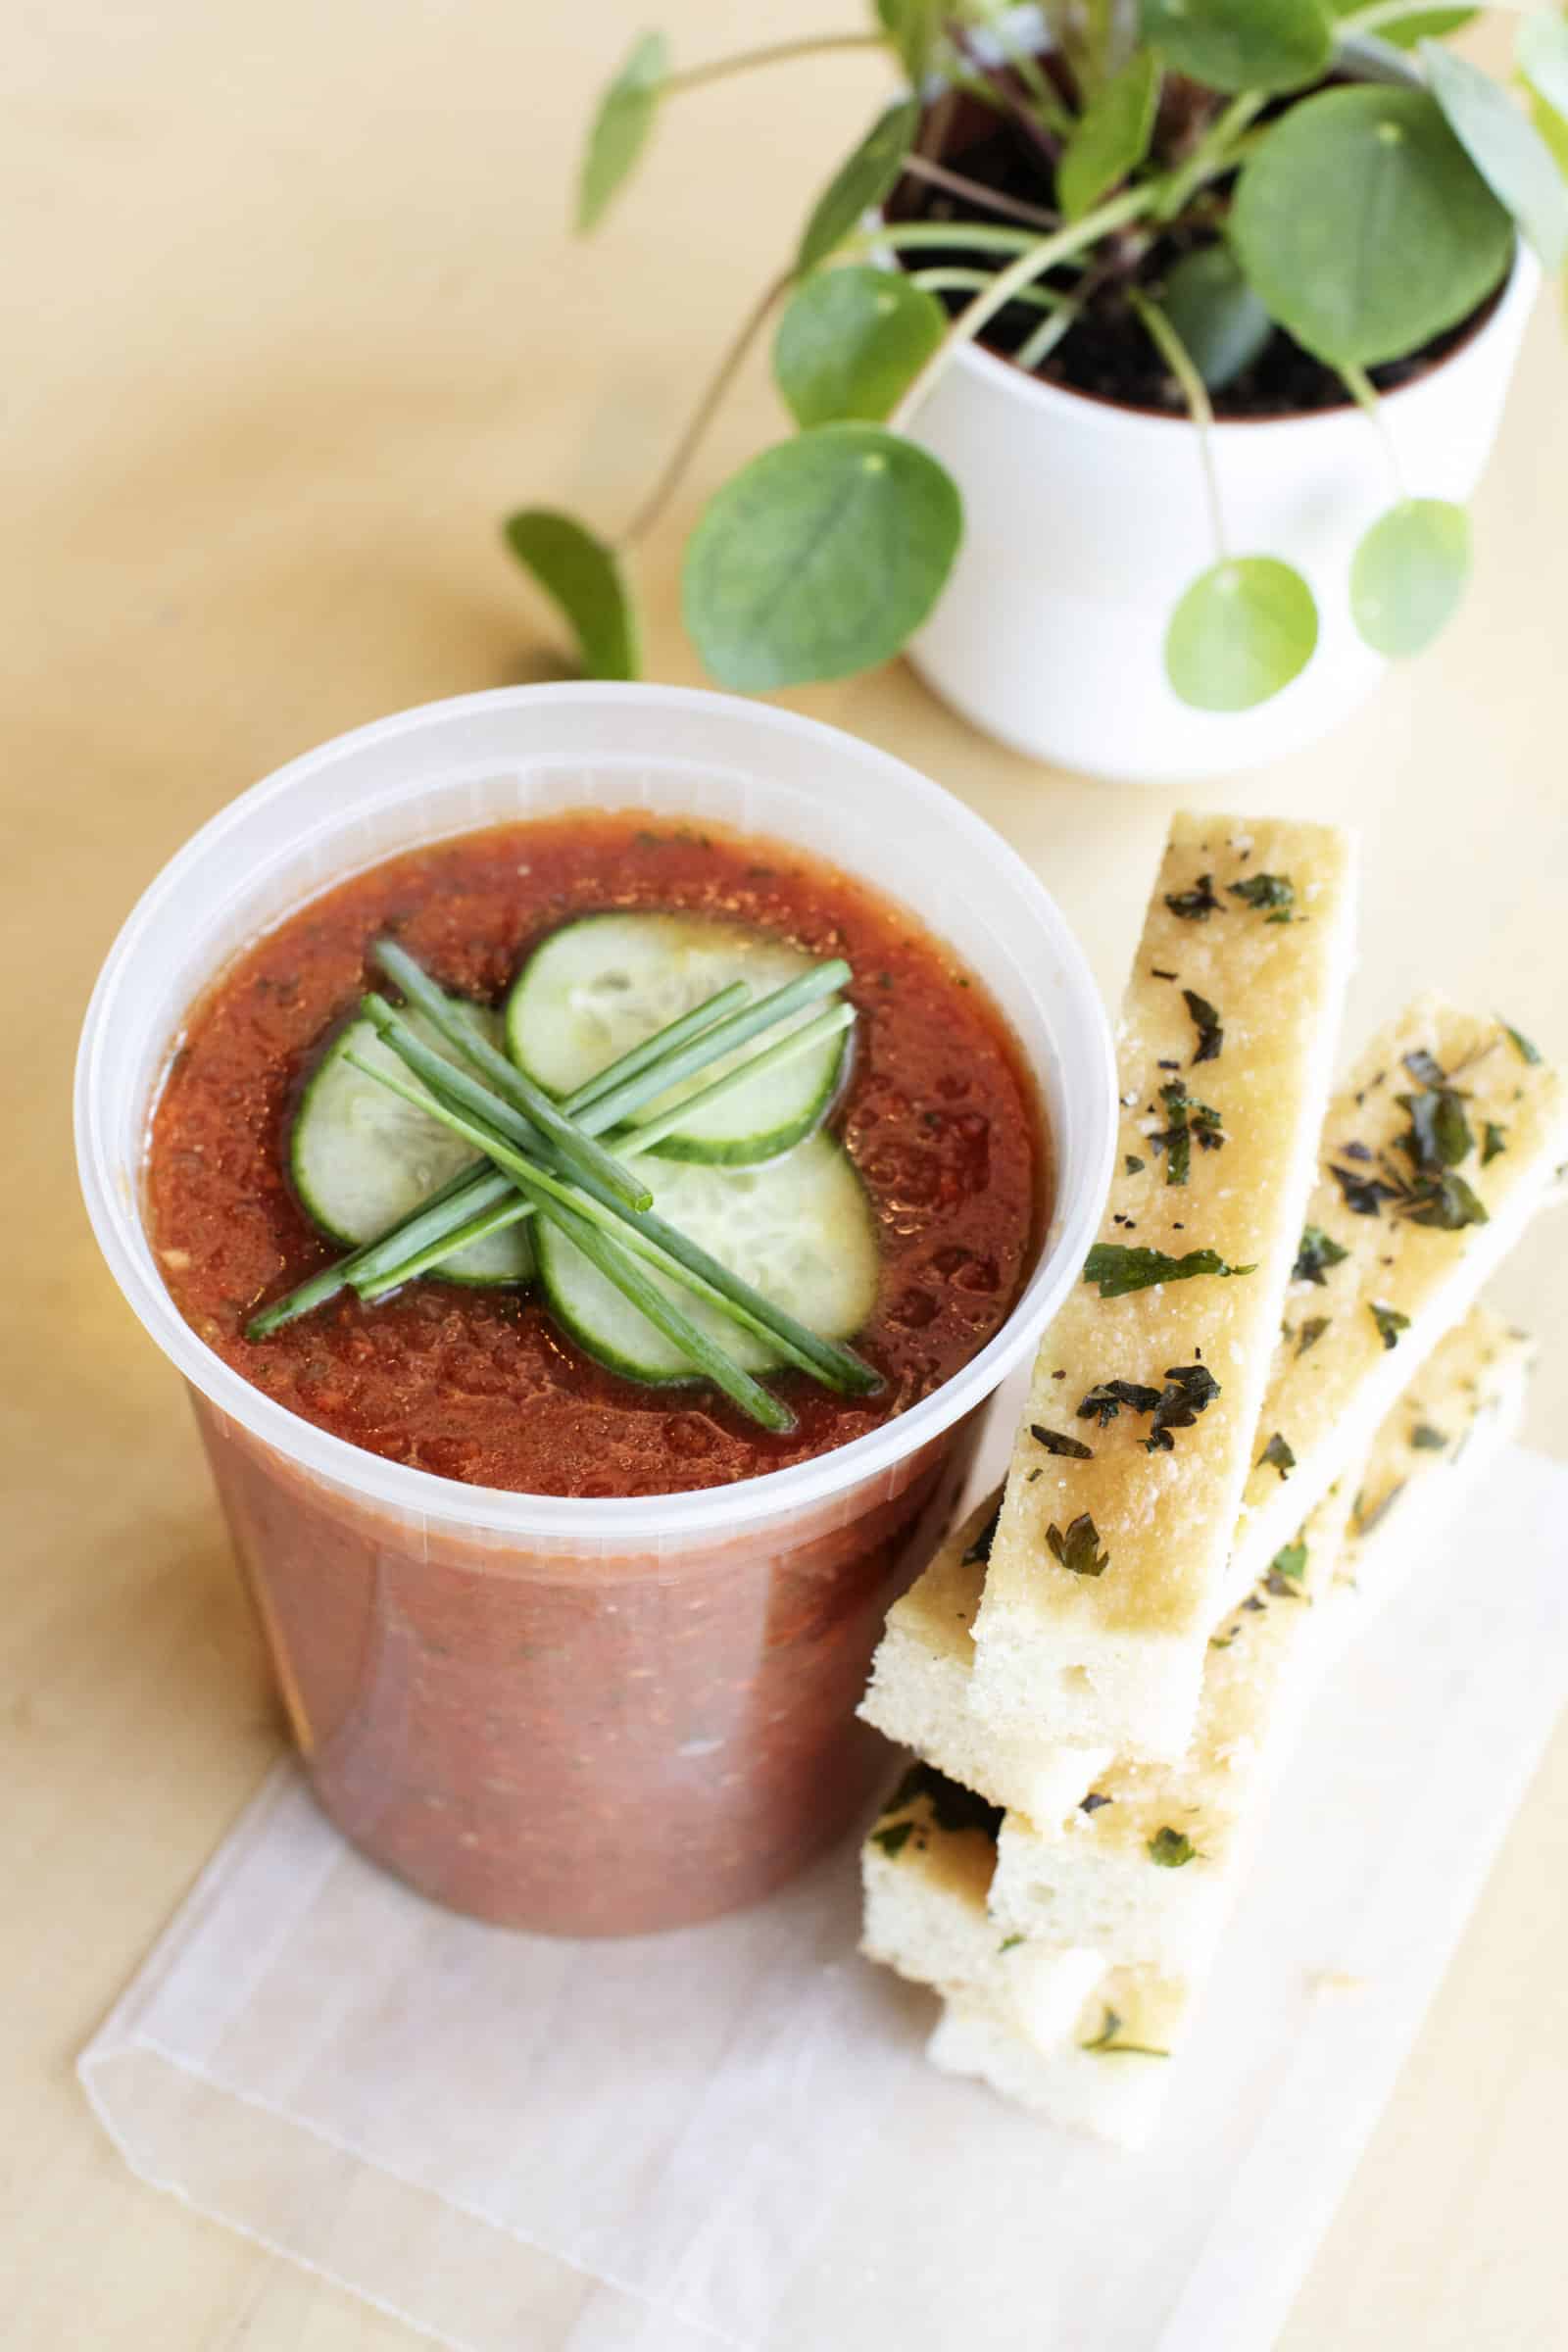 a quart of takeout gazpacho soup from yum! Kitchen and Bakery